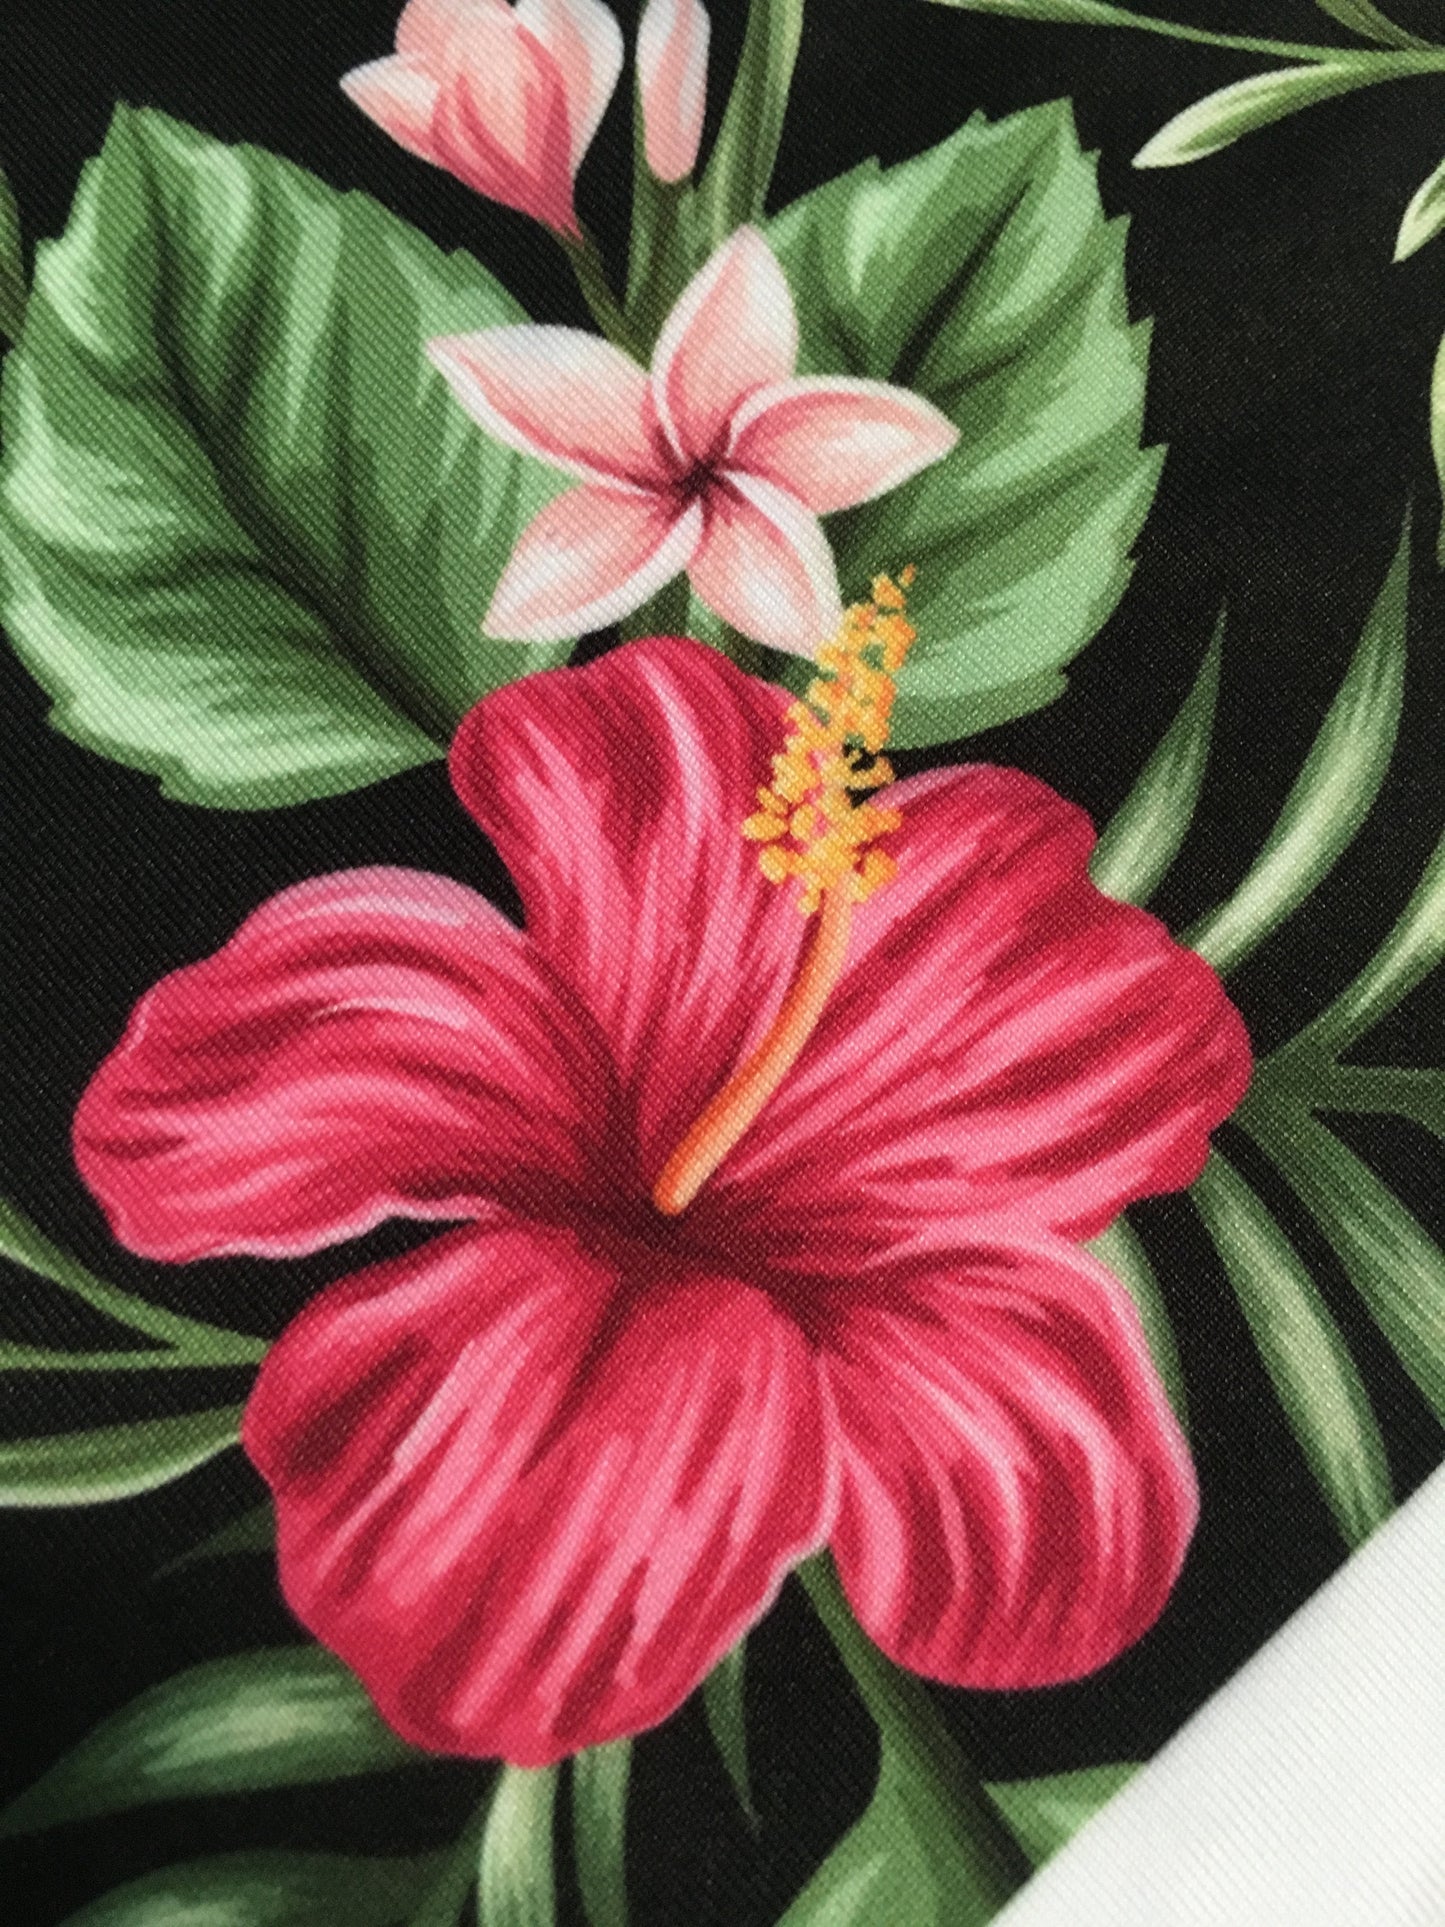 Hibiscus Flowers Black Fabric Floral Pattern Printed By the Yard